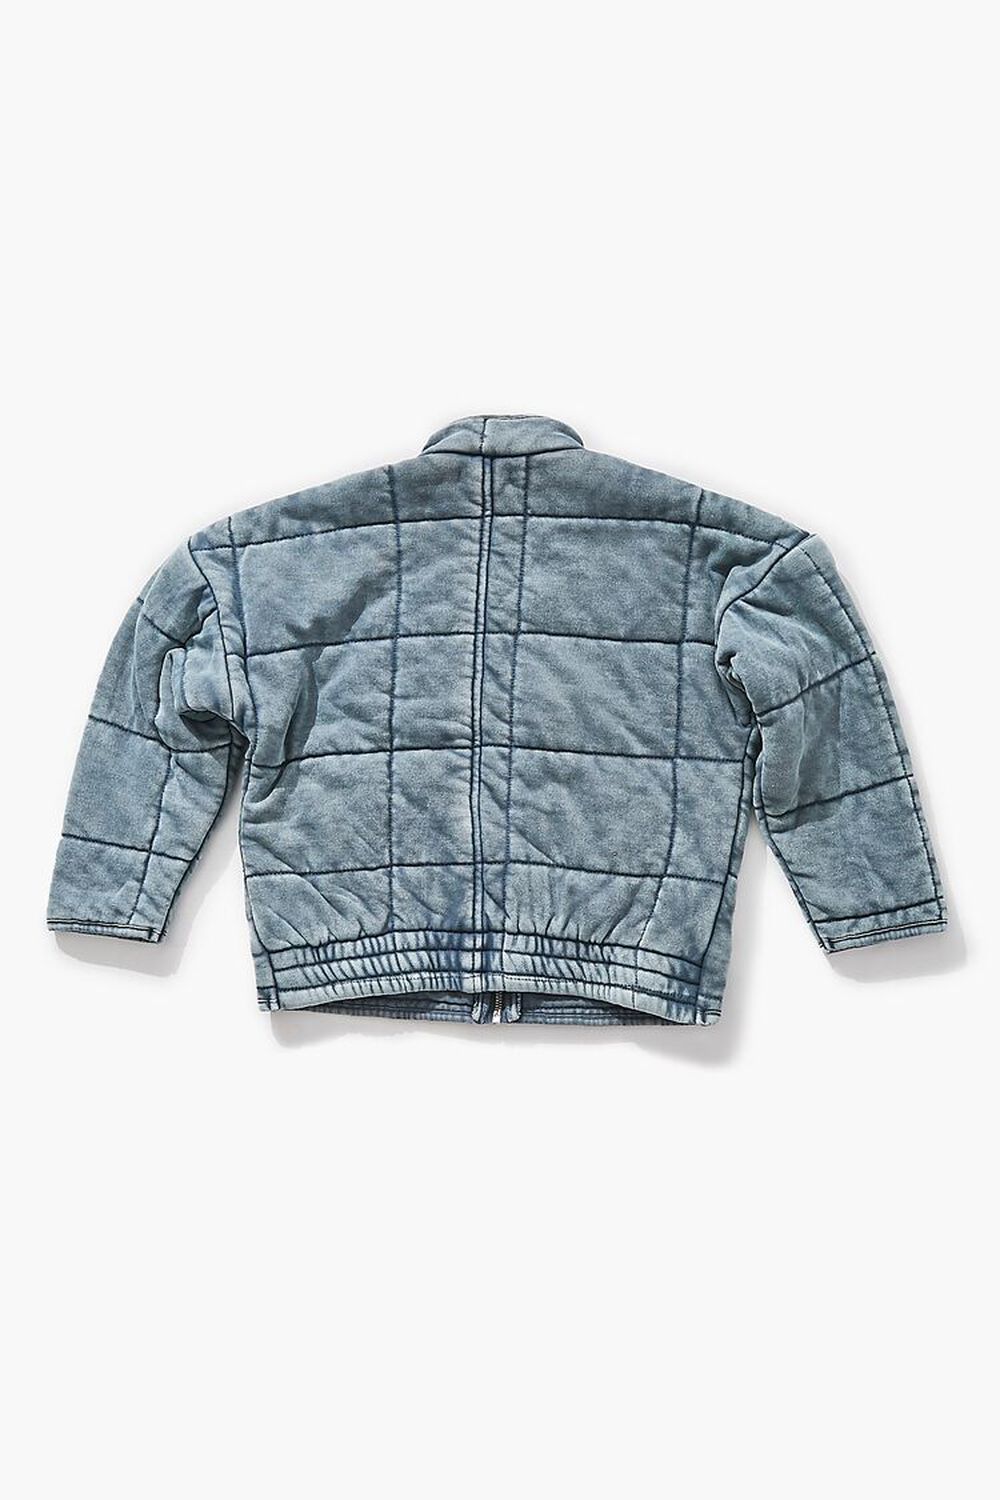 TEAL Kids Quilted Zip-Up Jacket (Girls + Boys), image 2